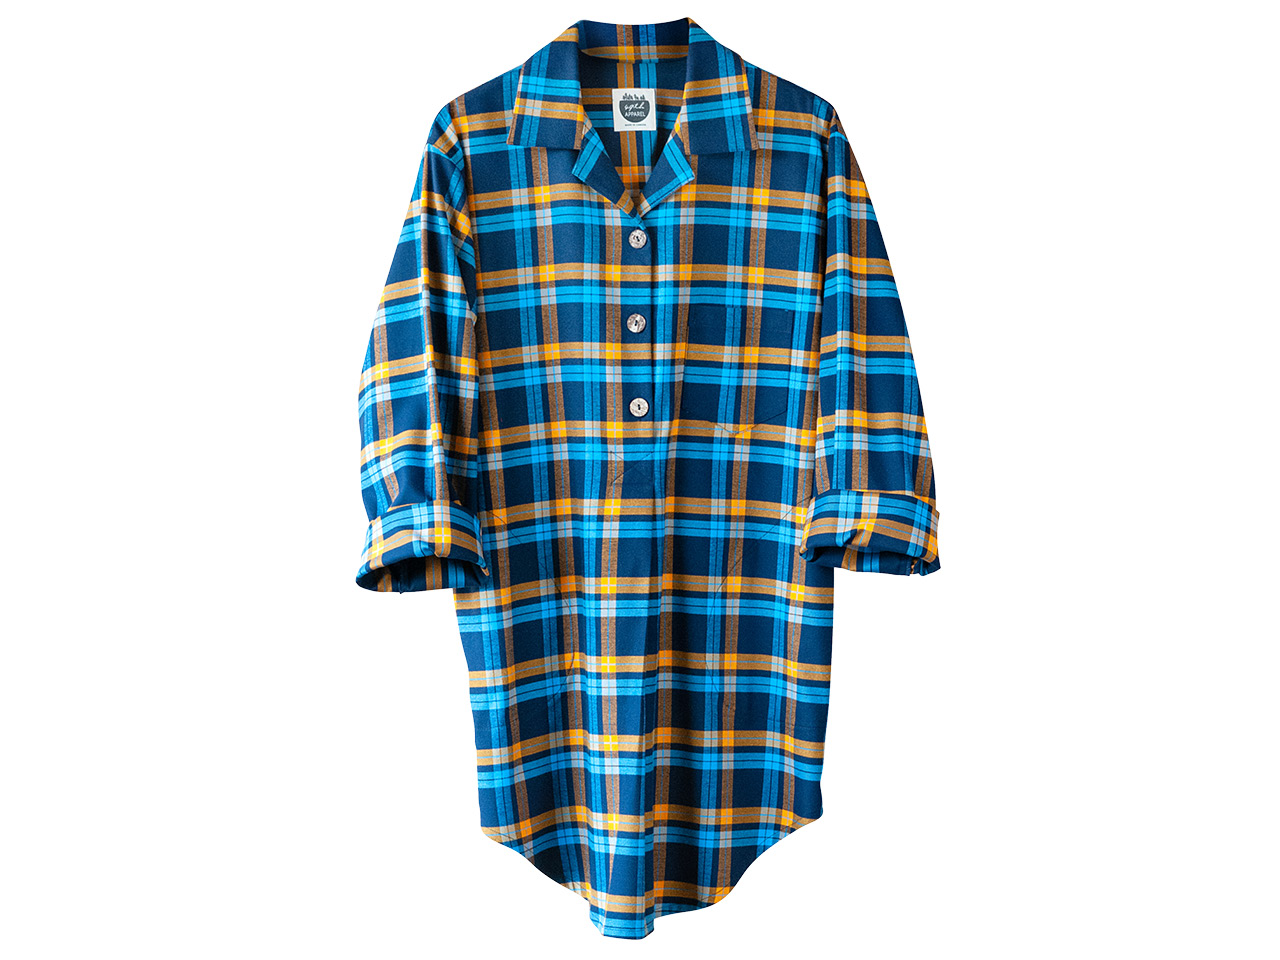 Blue and yellow checkered flannel sleep shirt